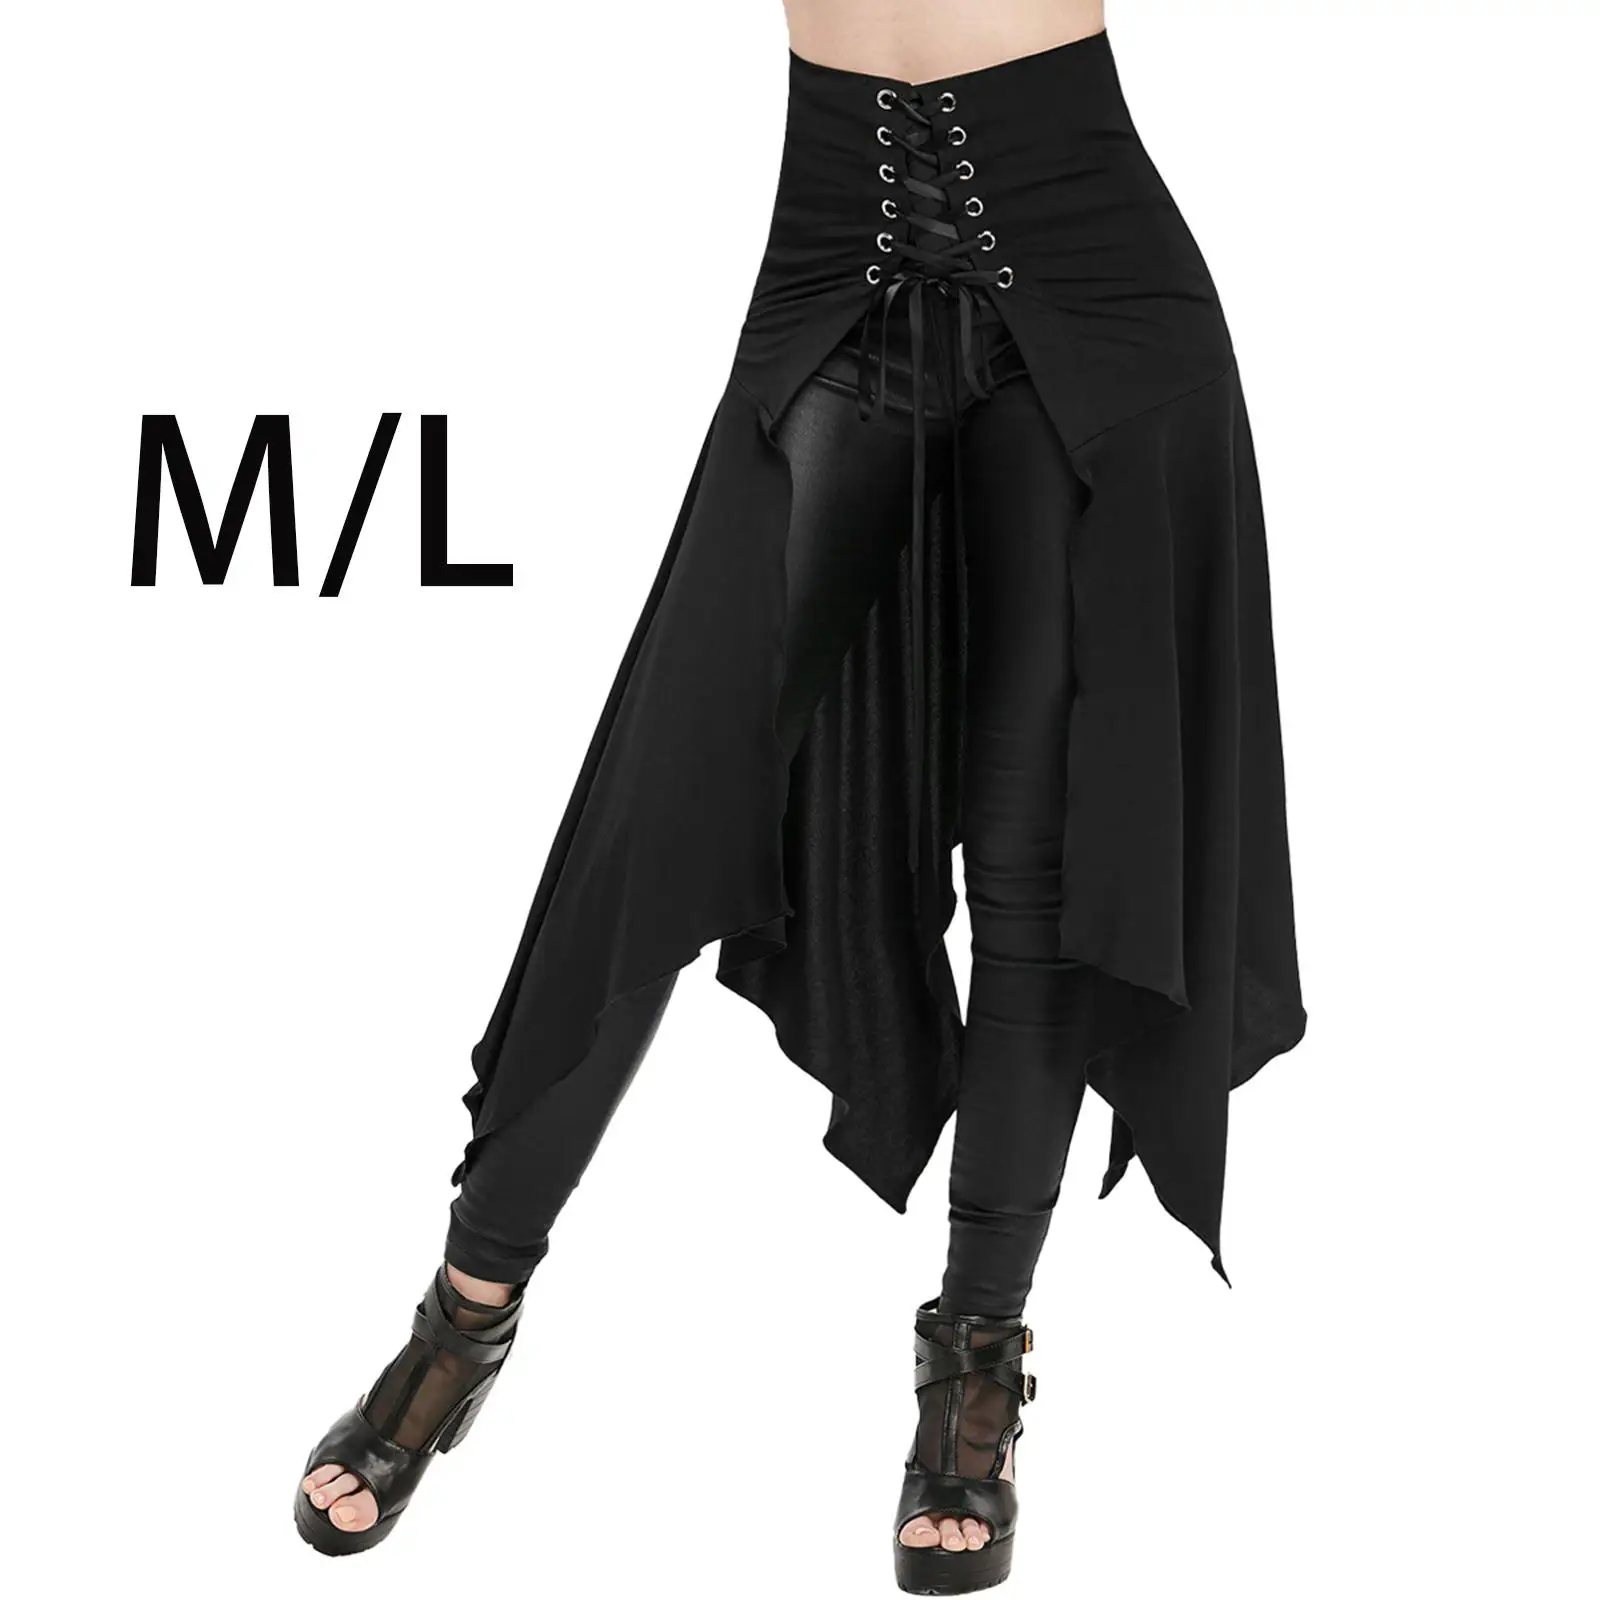 Womens Midi Skirt Gothic Punk Tulle Skirts Halloween Costume Accessory for Stage Performance Masquerade Festival Prom Dress up